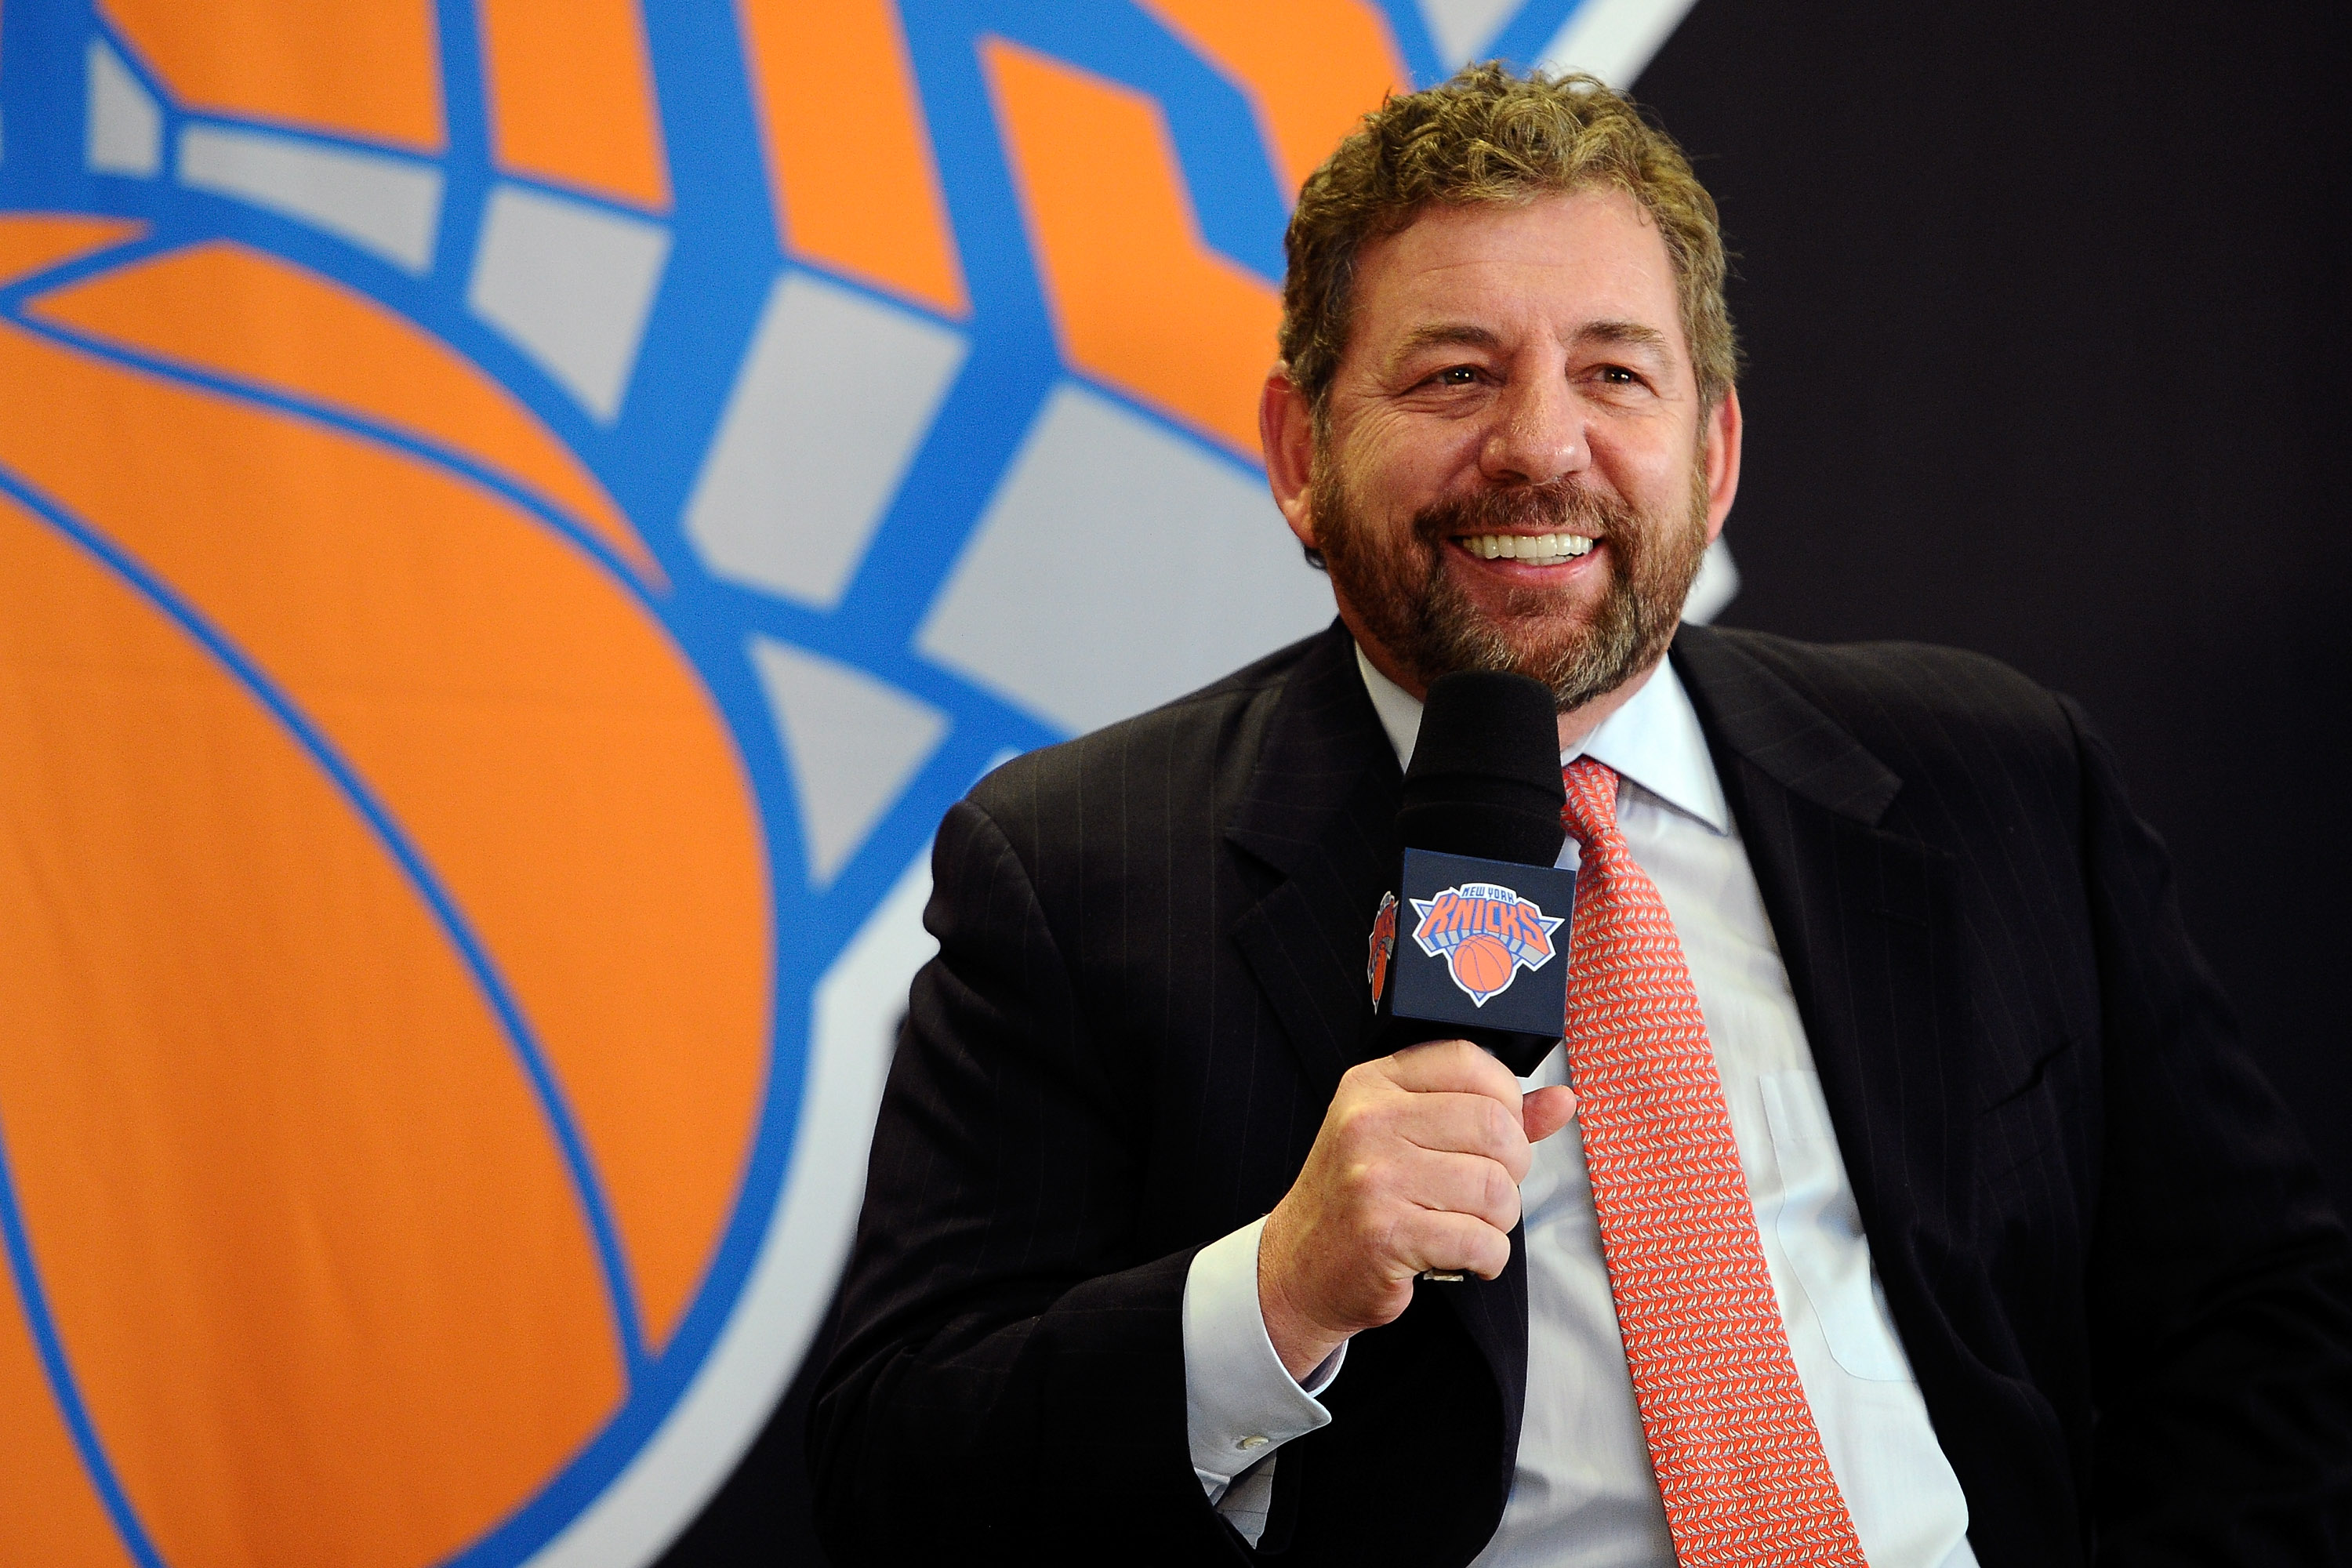 Analysis: To contend with top teams, Knicks must do more - Newsday